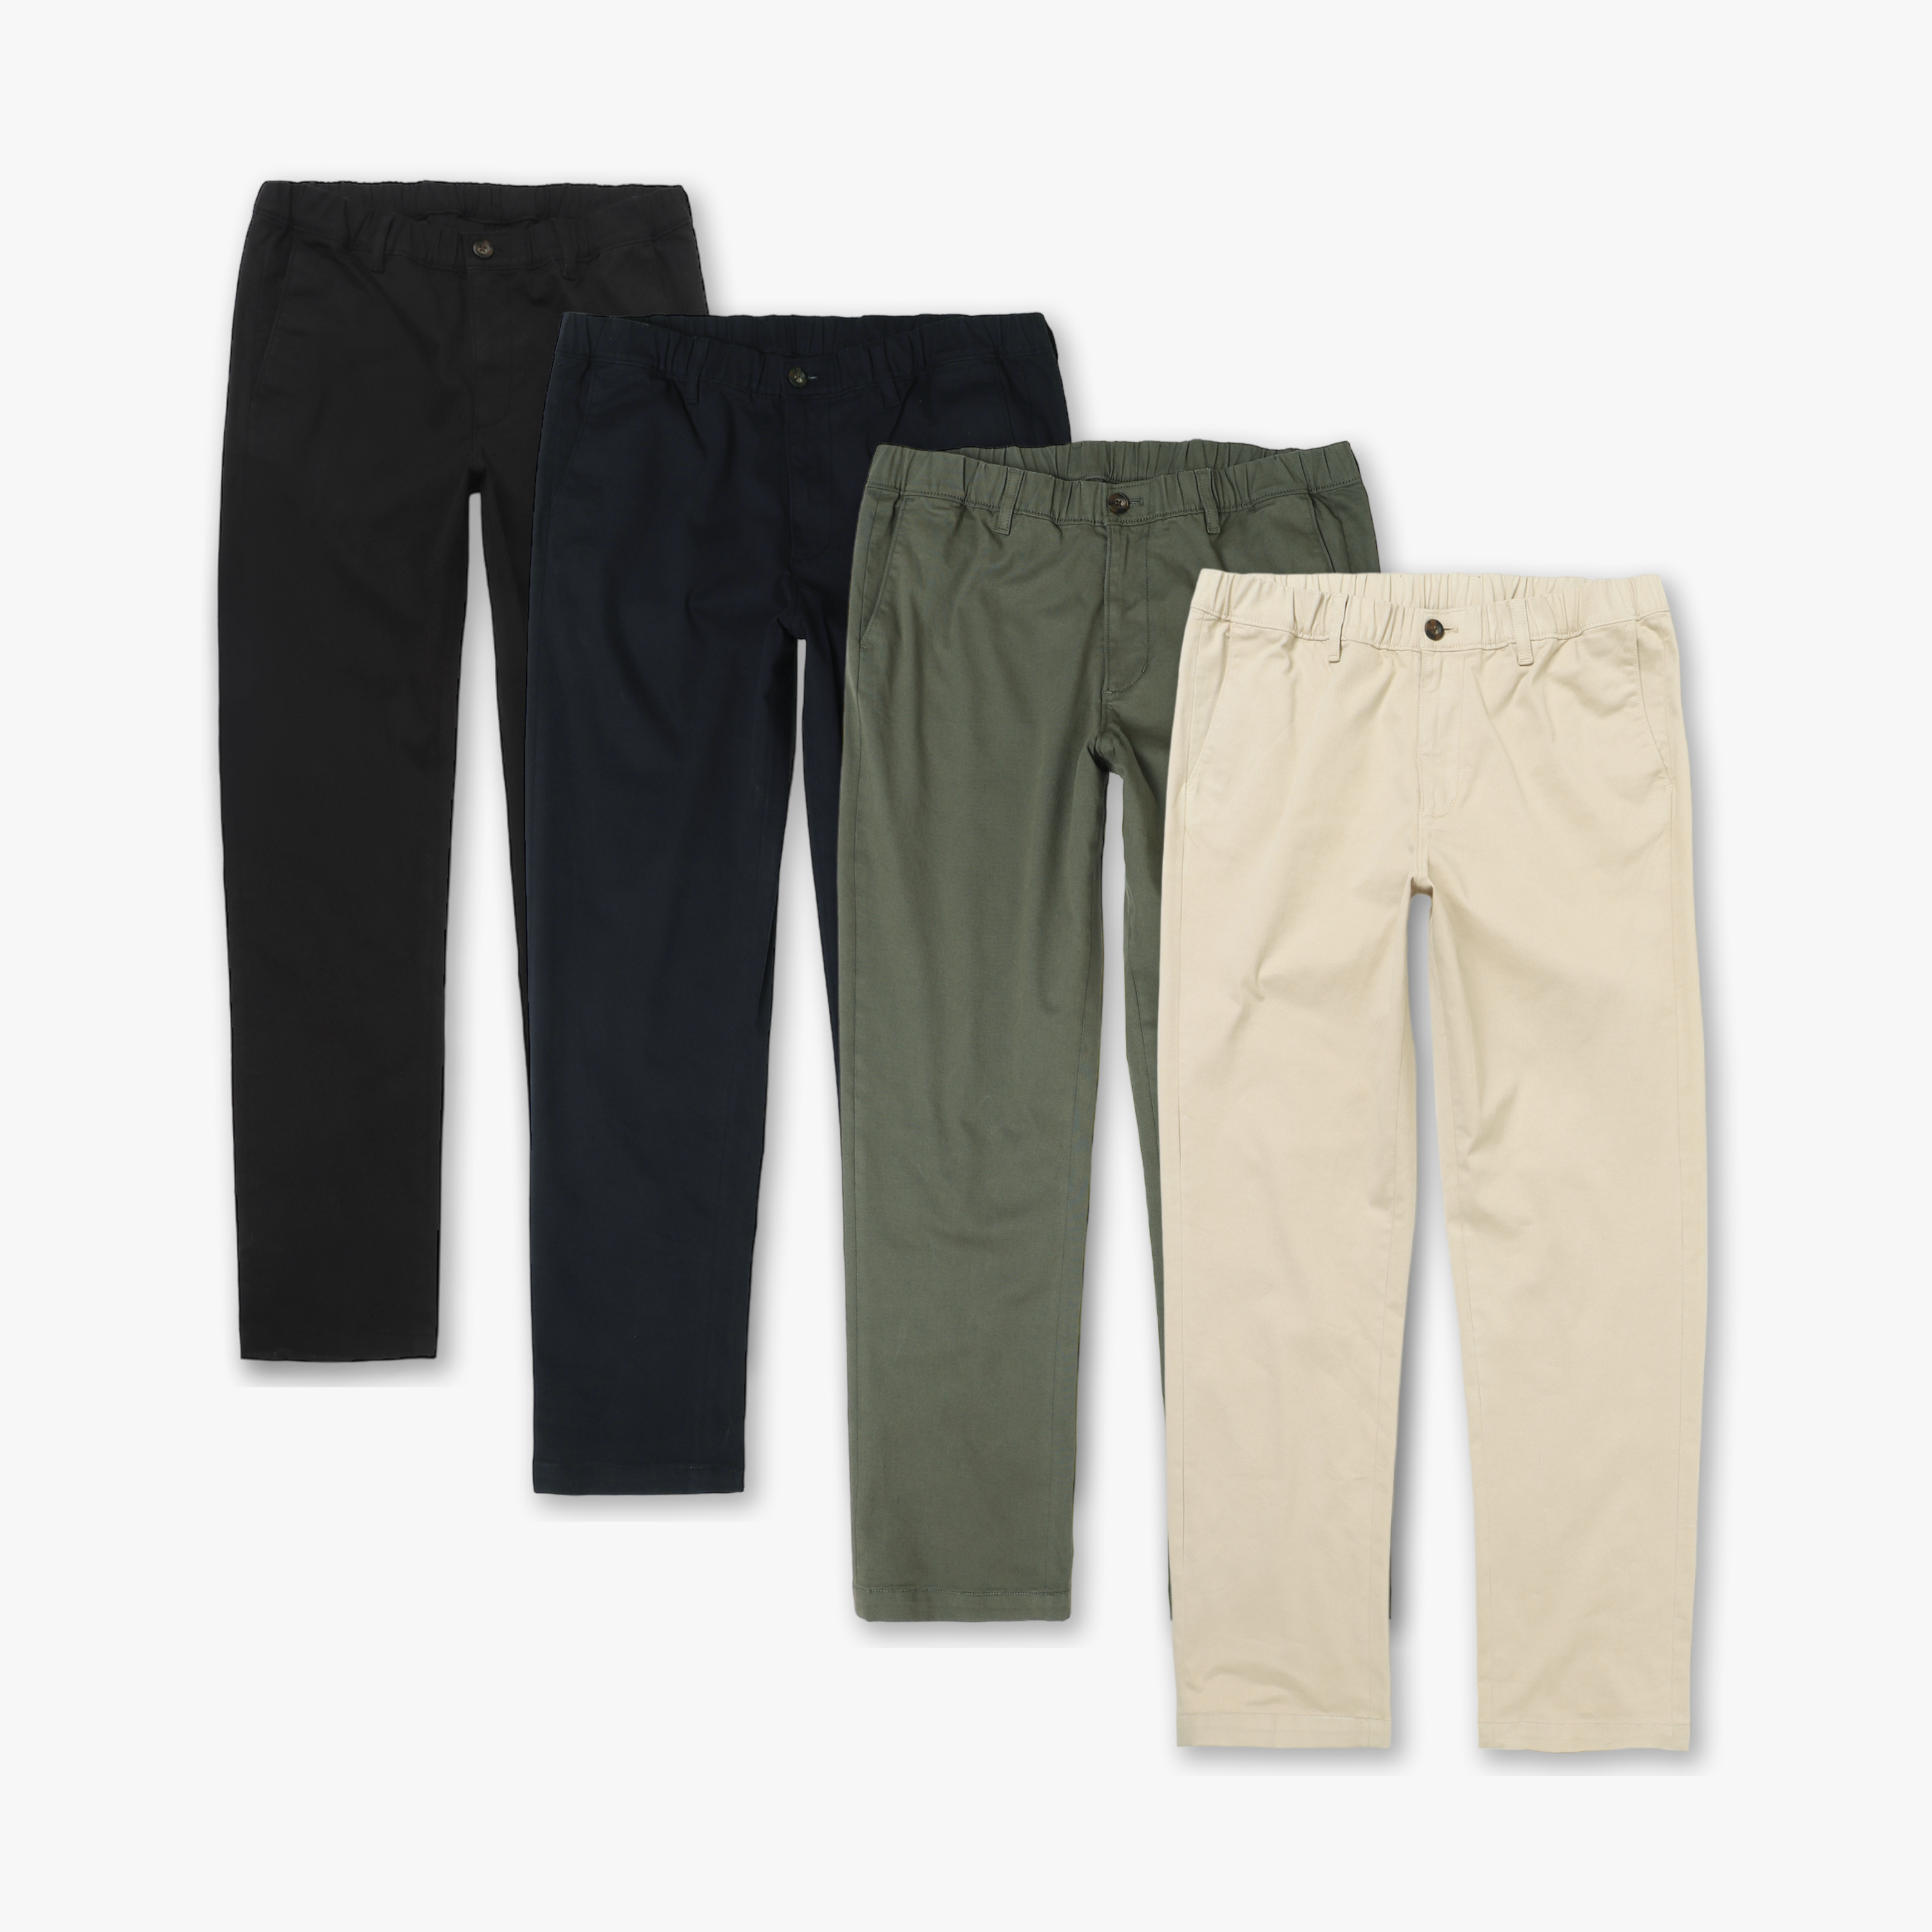 Chinos - Men's Chinos : Shop Chinos online | O.N.S